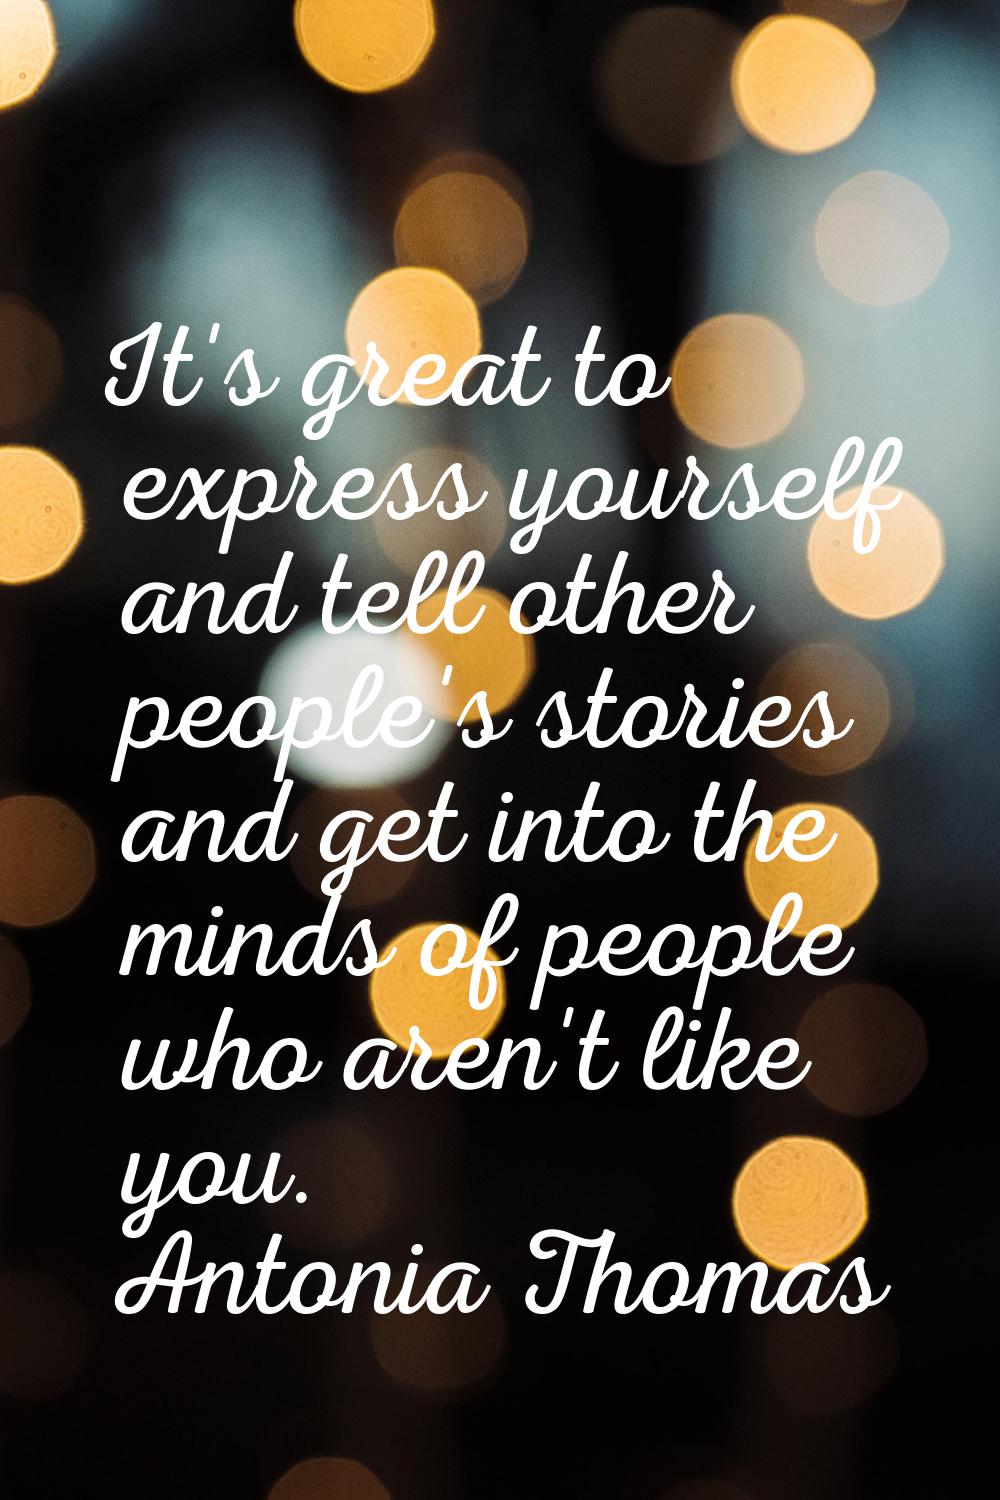 It's great to express yourself and tell other people's stories and get into the minds of people who